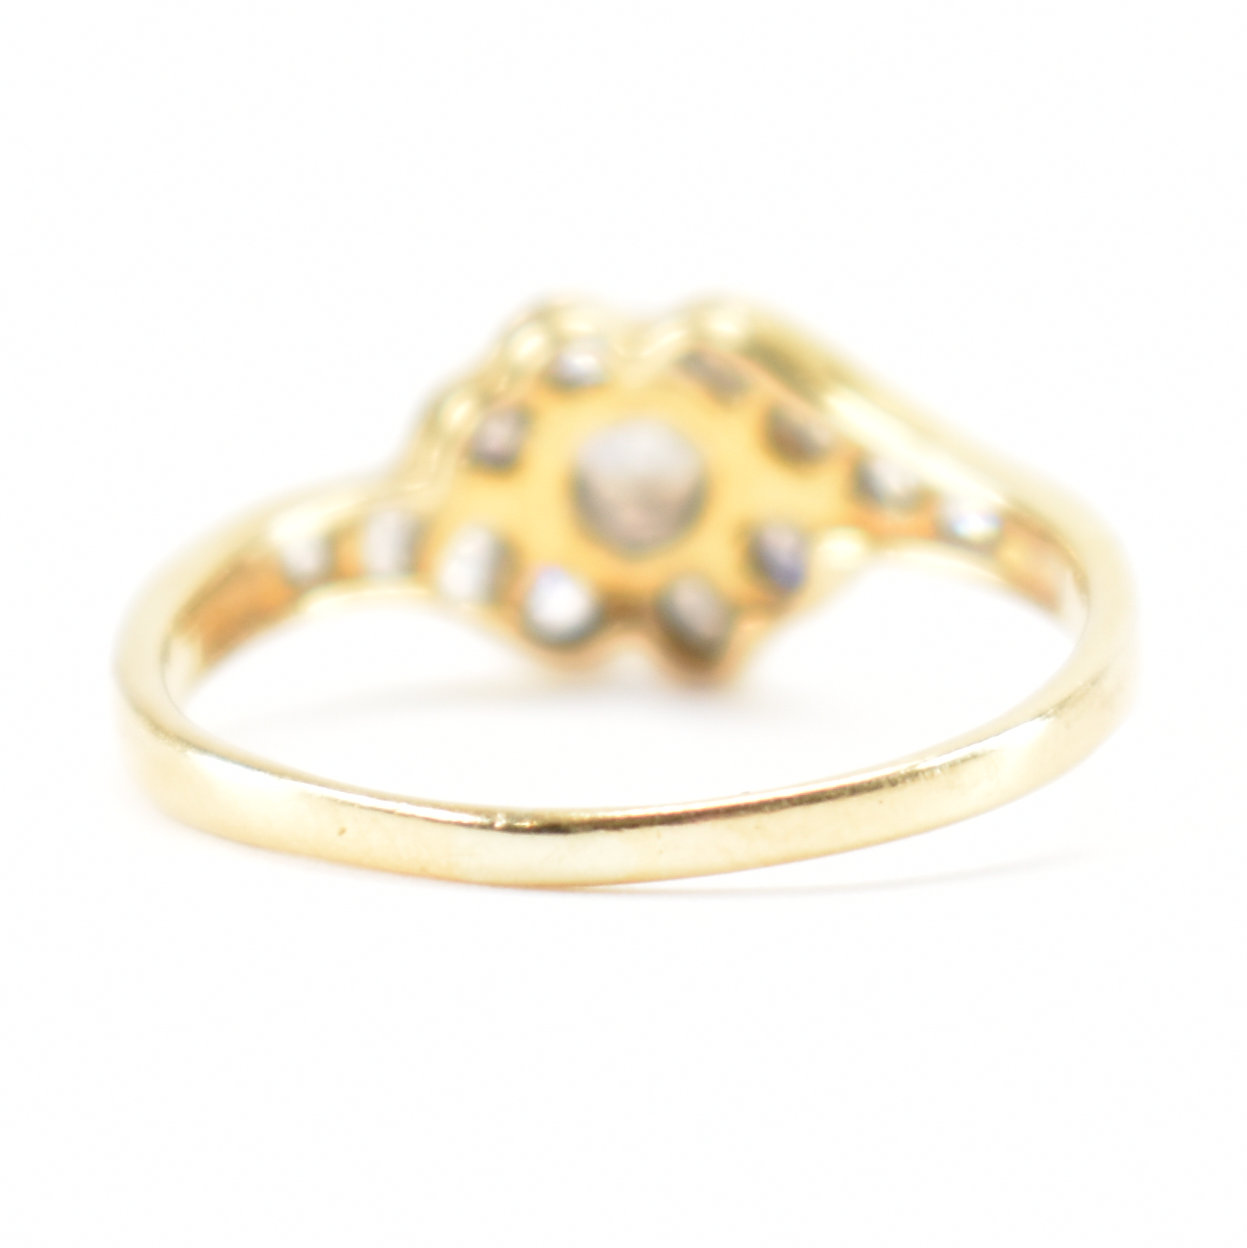 VINTAGE GOLD & DIAMOND CROSS OVER RING - Image 4 of 7